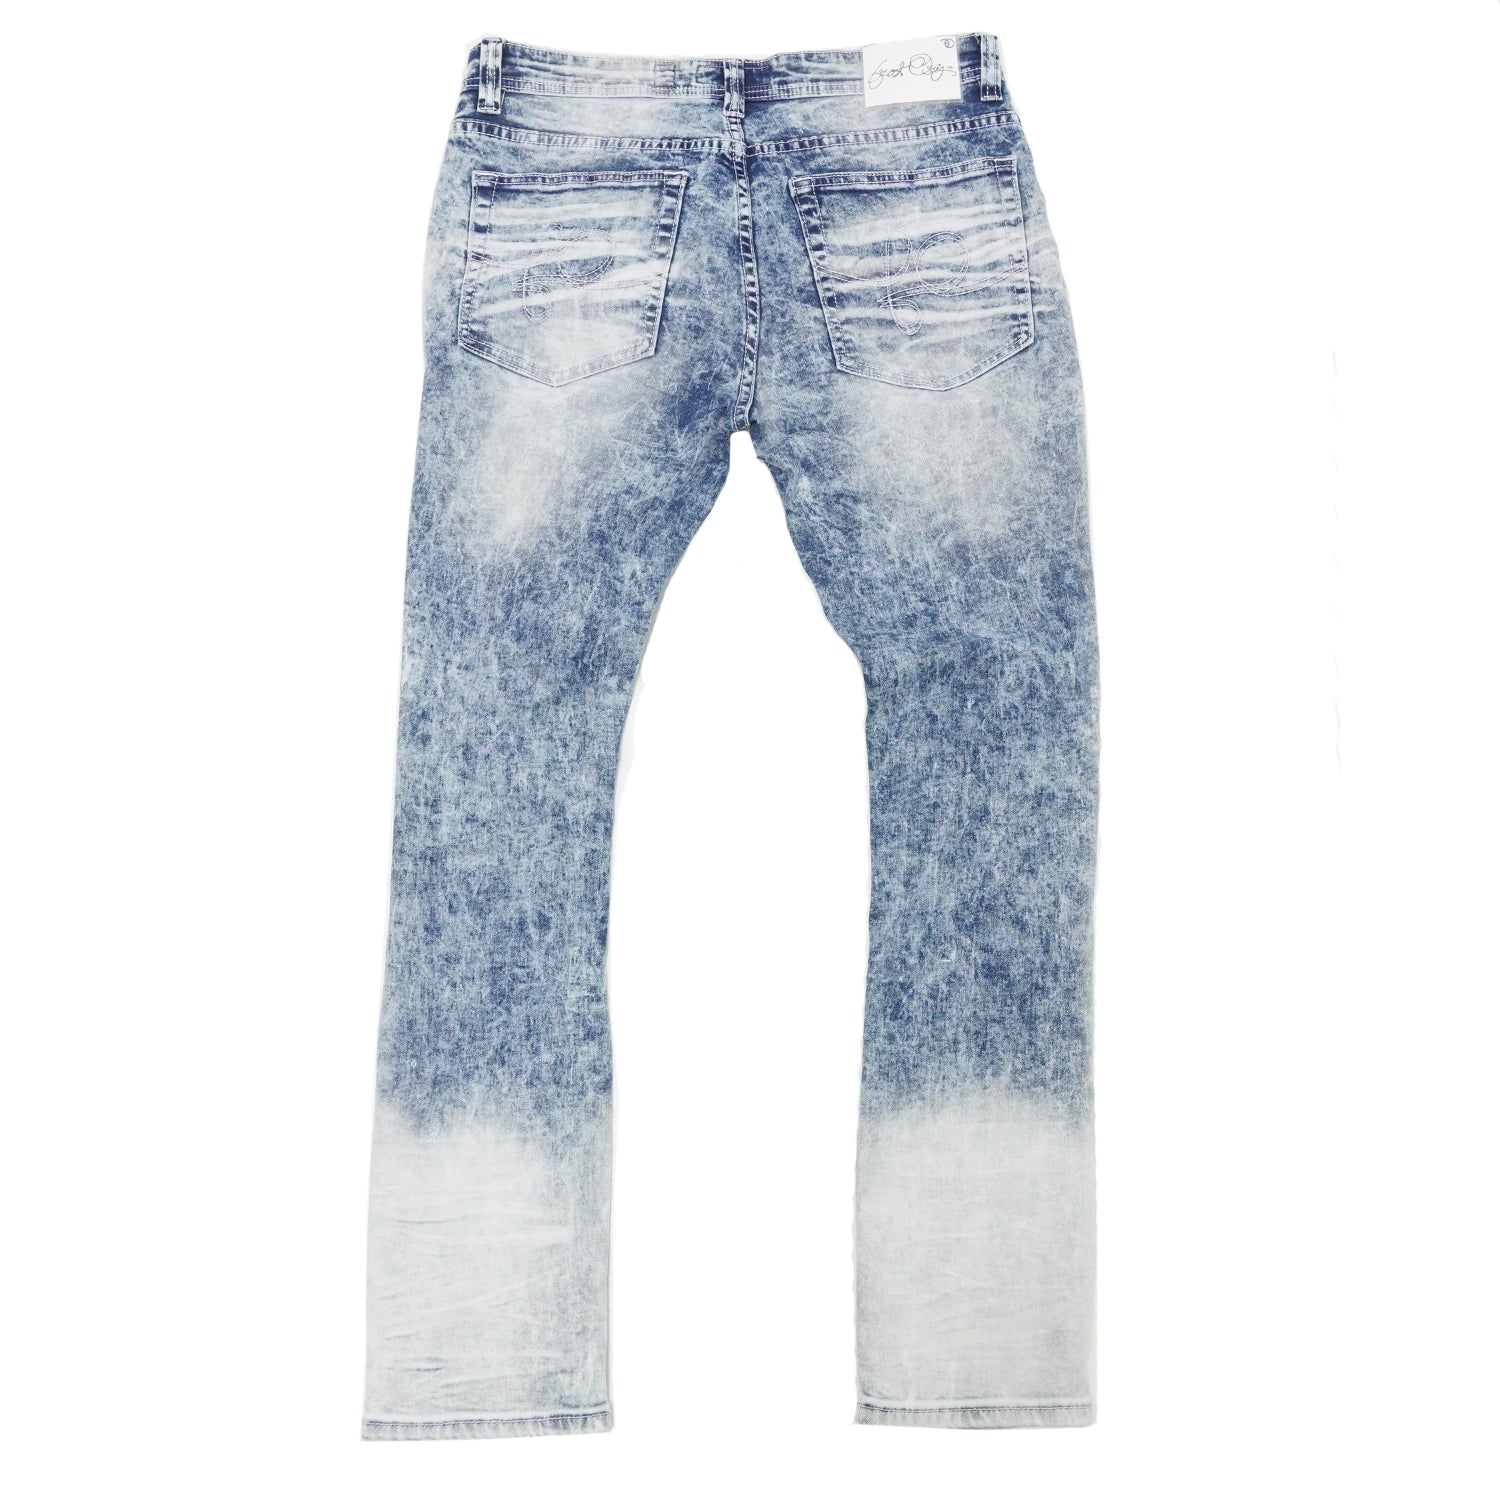 F1722 FROST Ripped Jeans - Light Wash